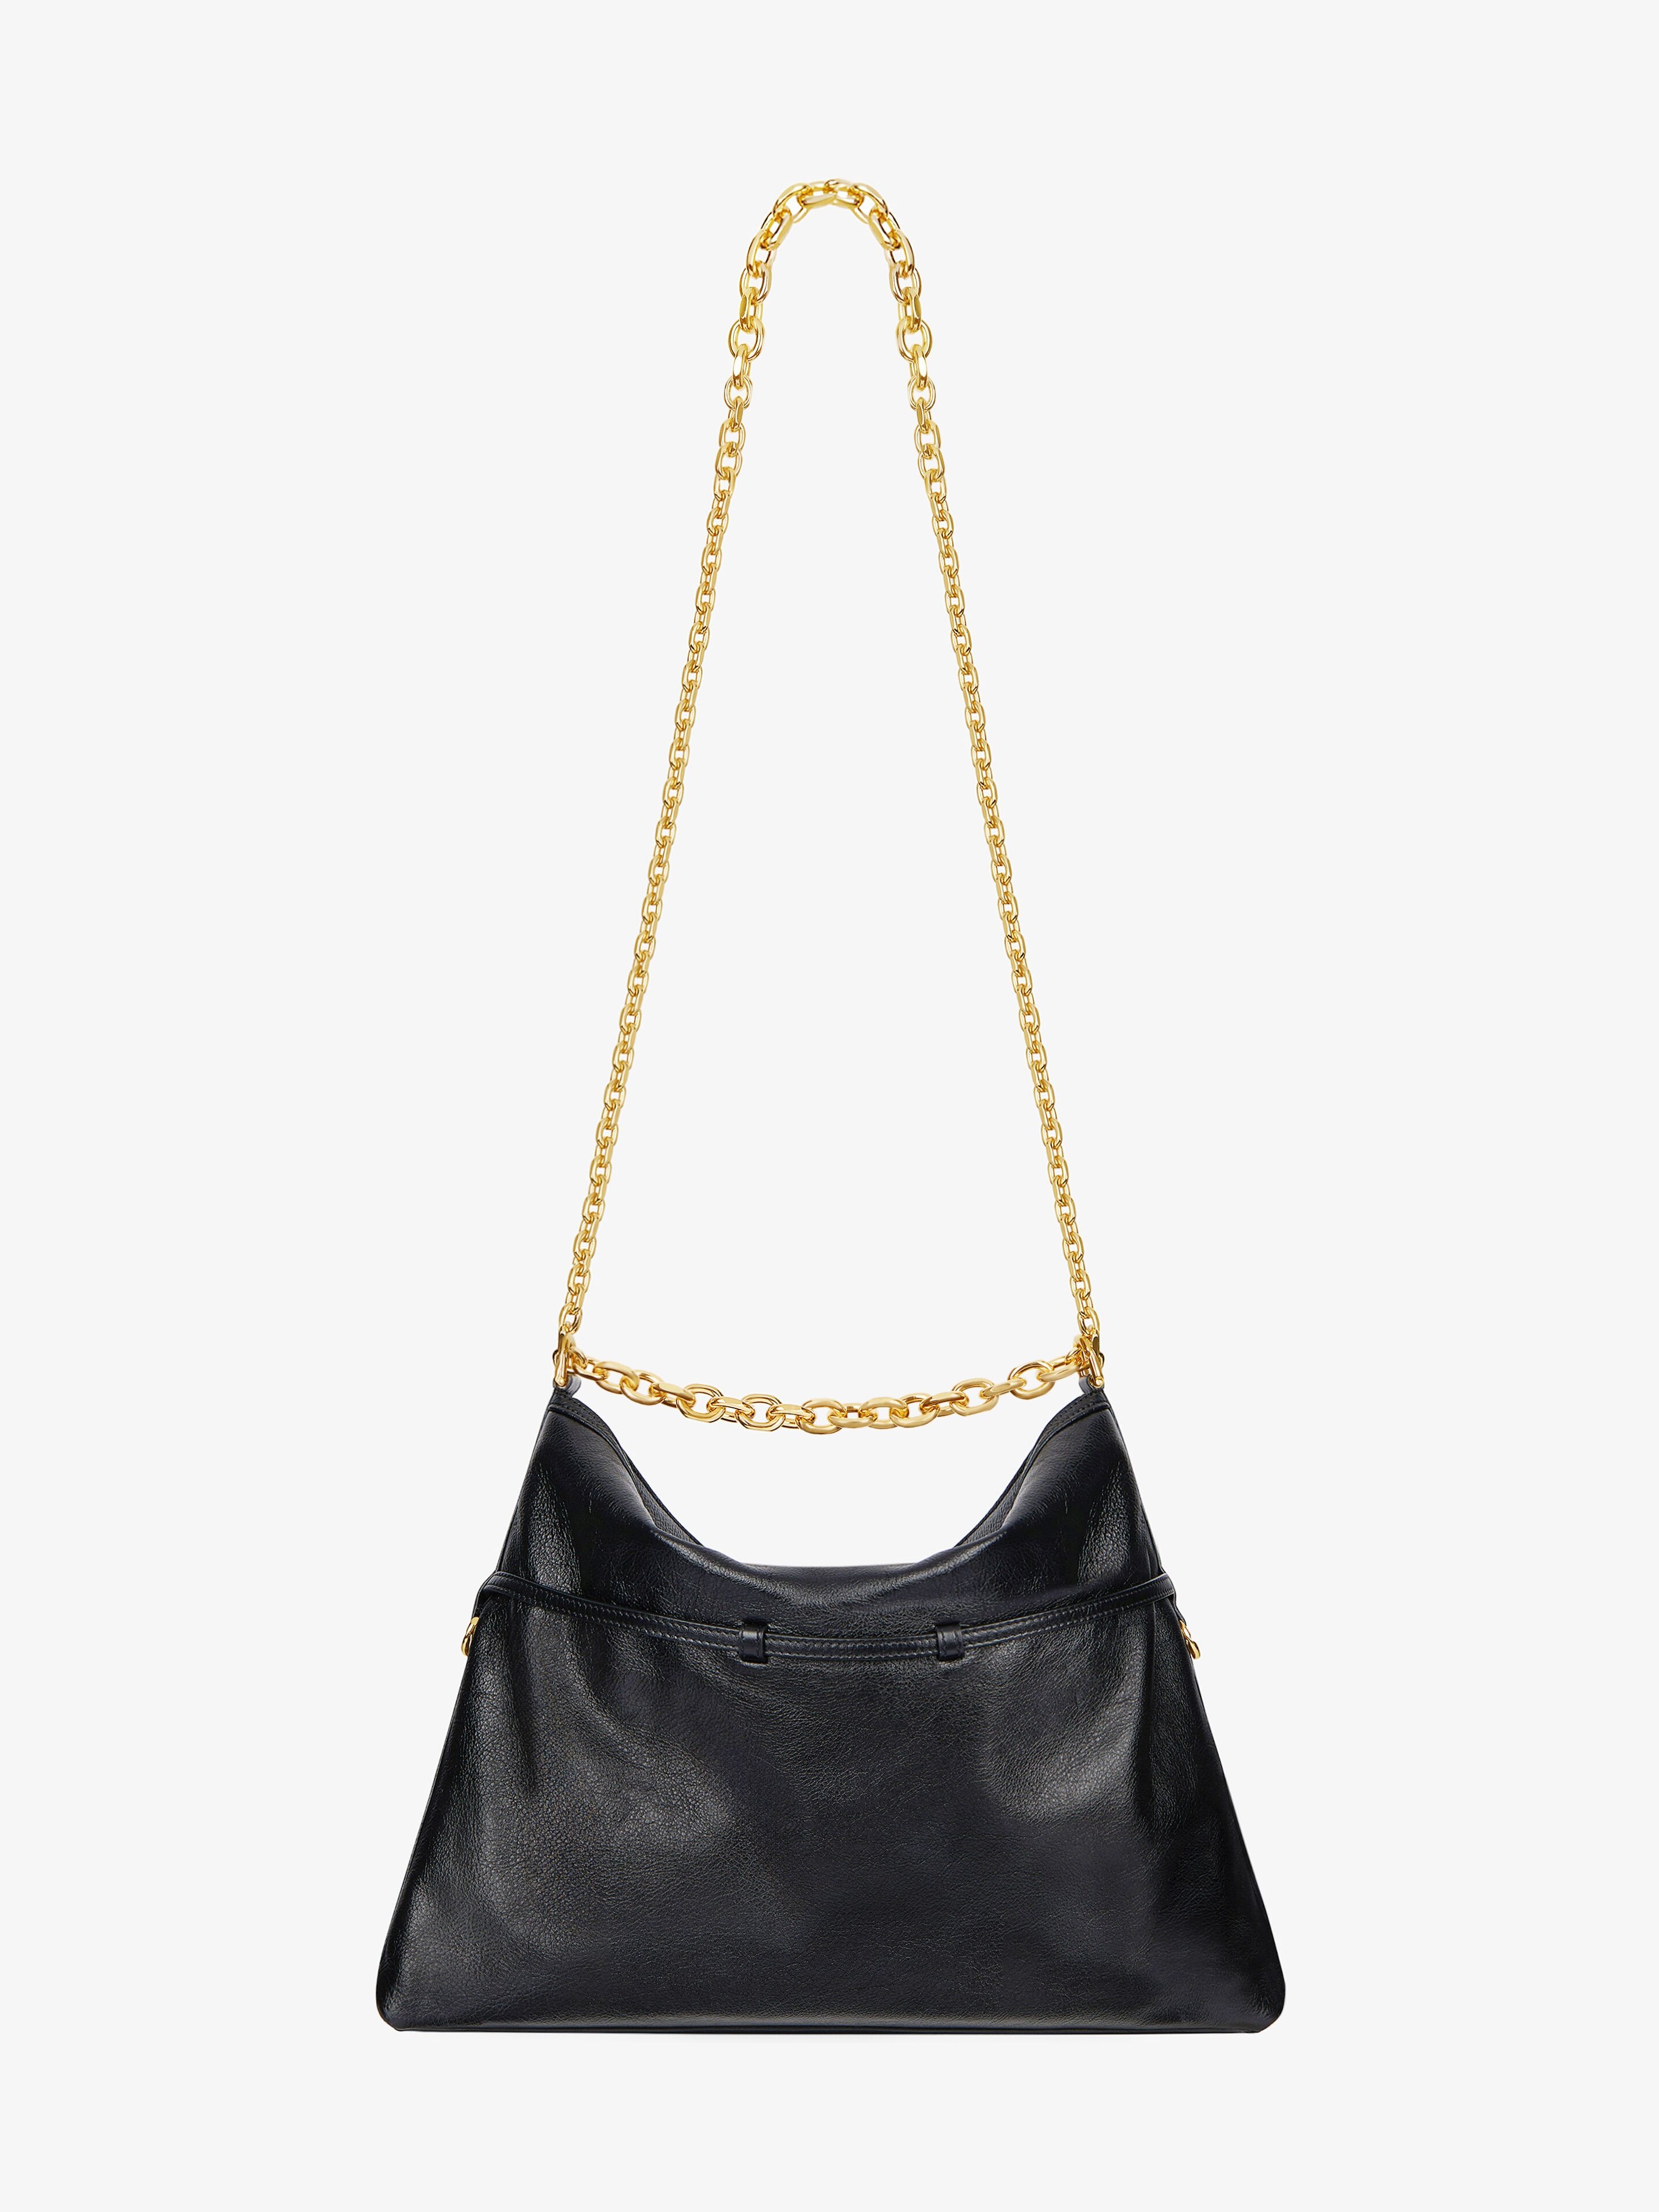 MEDIUM VOYOU CHAIN BAG IN LEATHER - 4